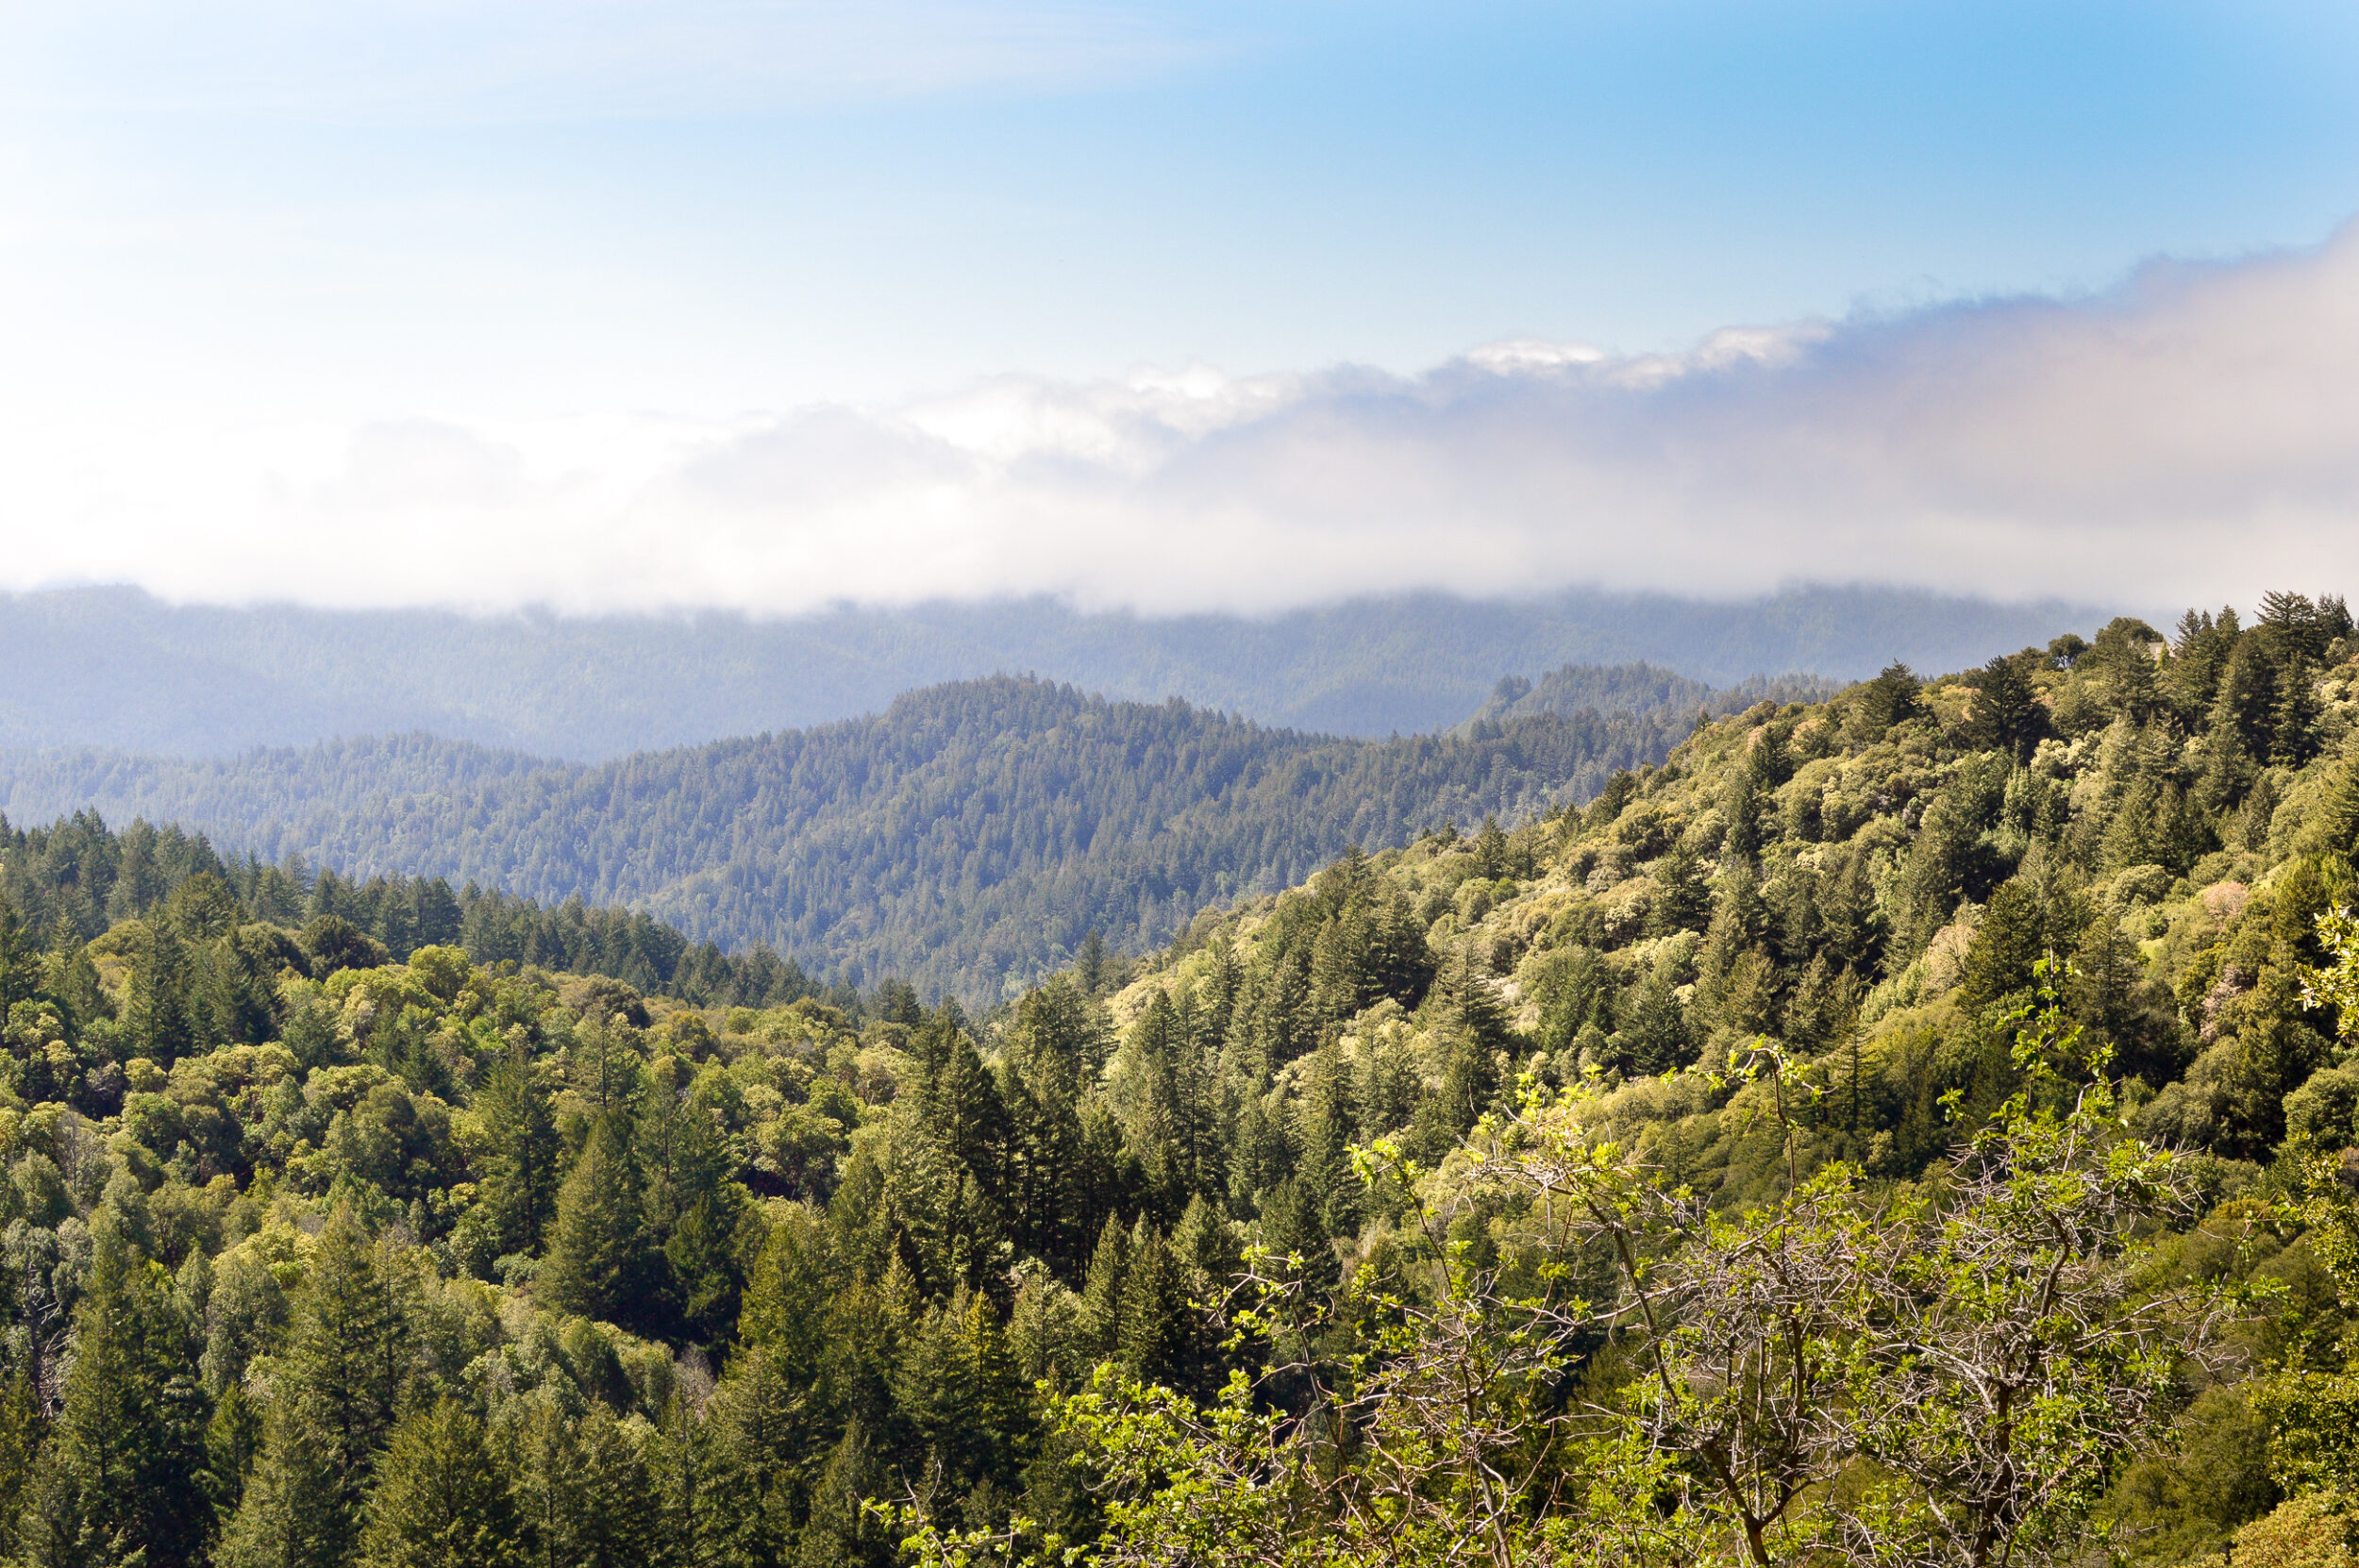 Rolling forested hills under a hazy sky with clouds nestled between peaks.